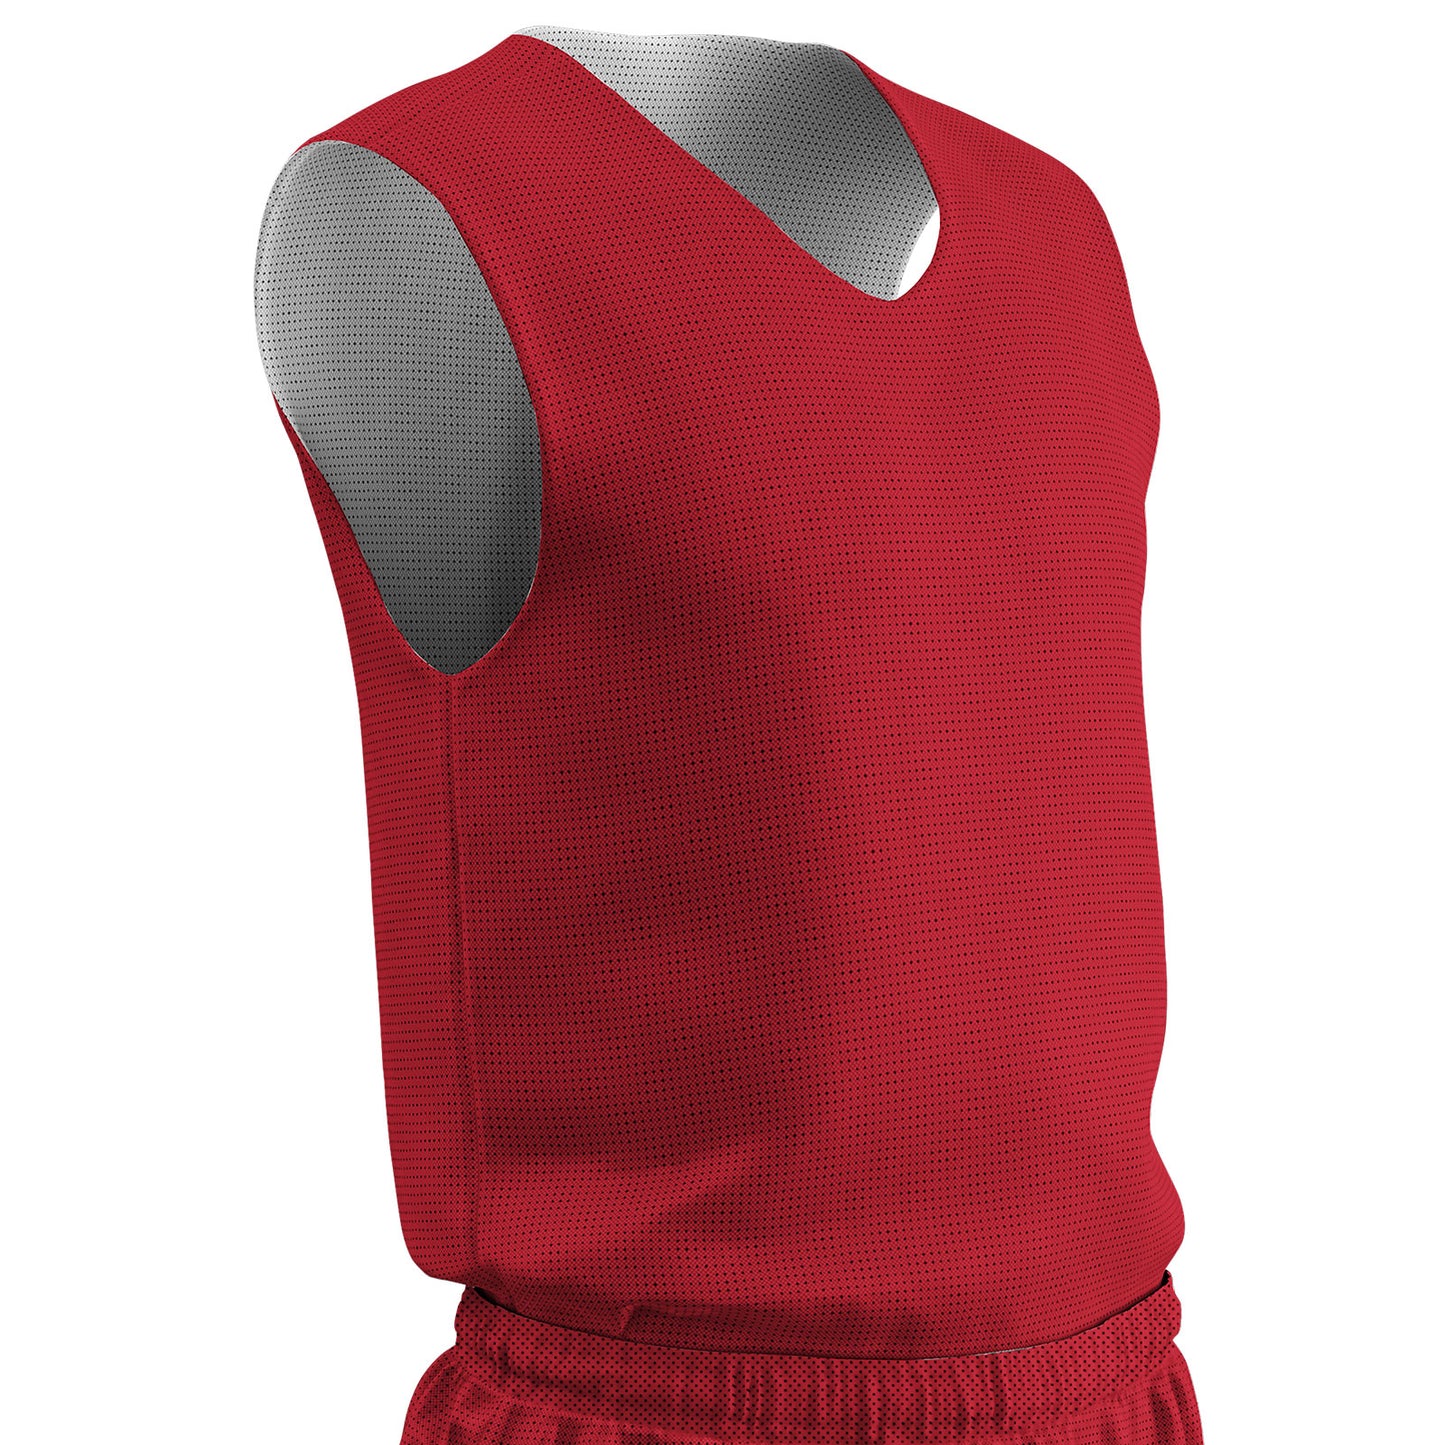 Polyester Tricot Mesh Boys Reversible Basketball Jersey, Youth